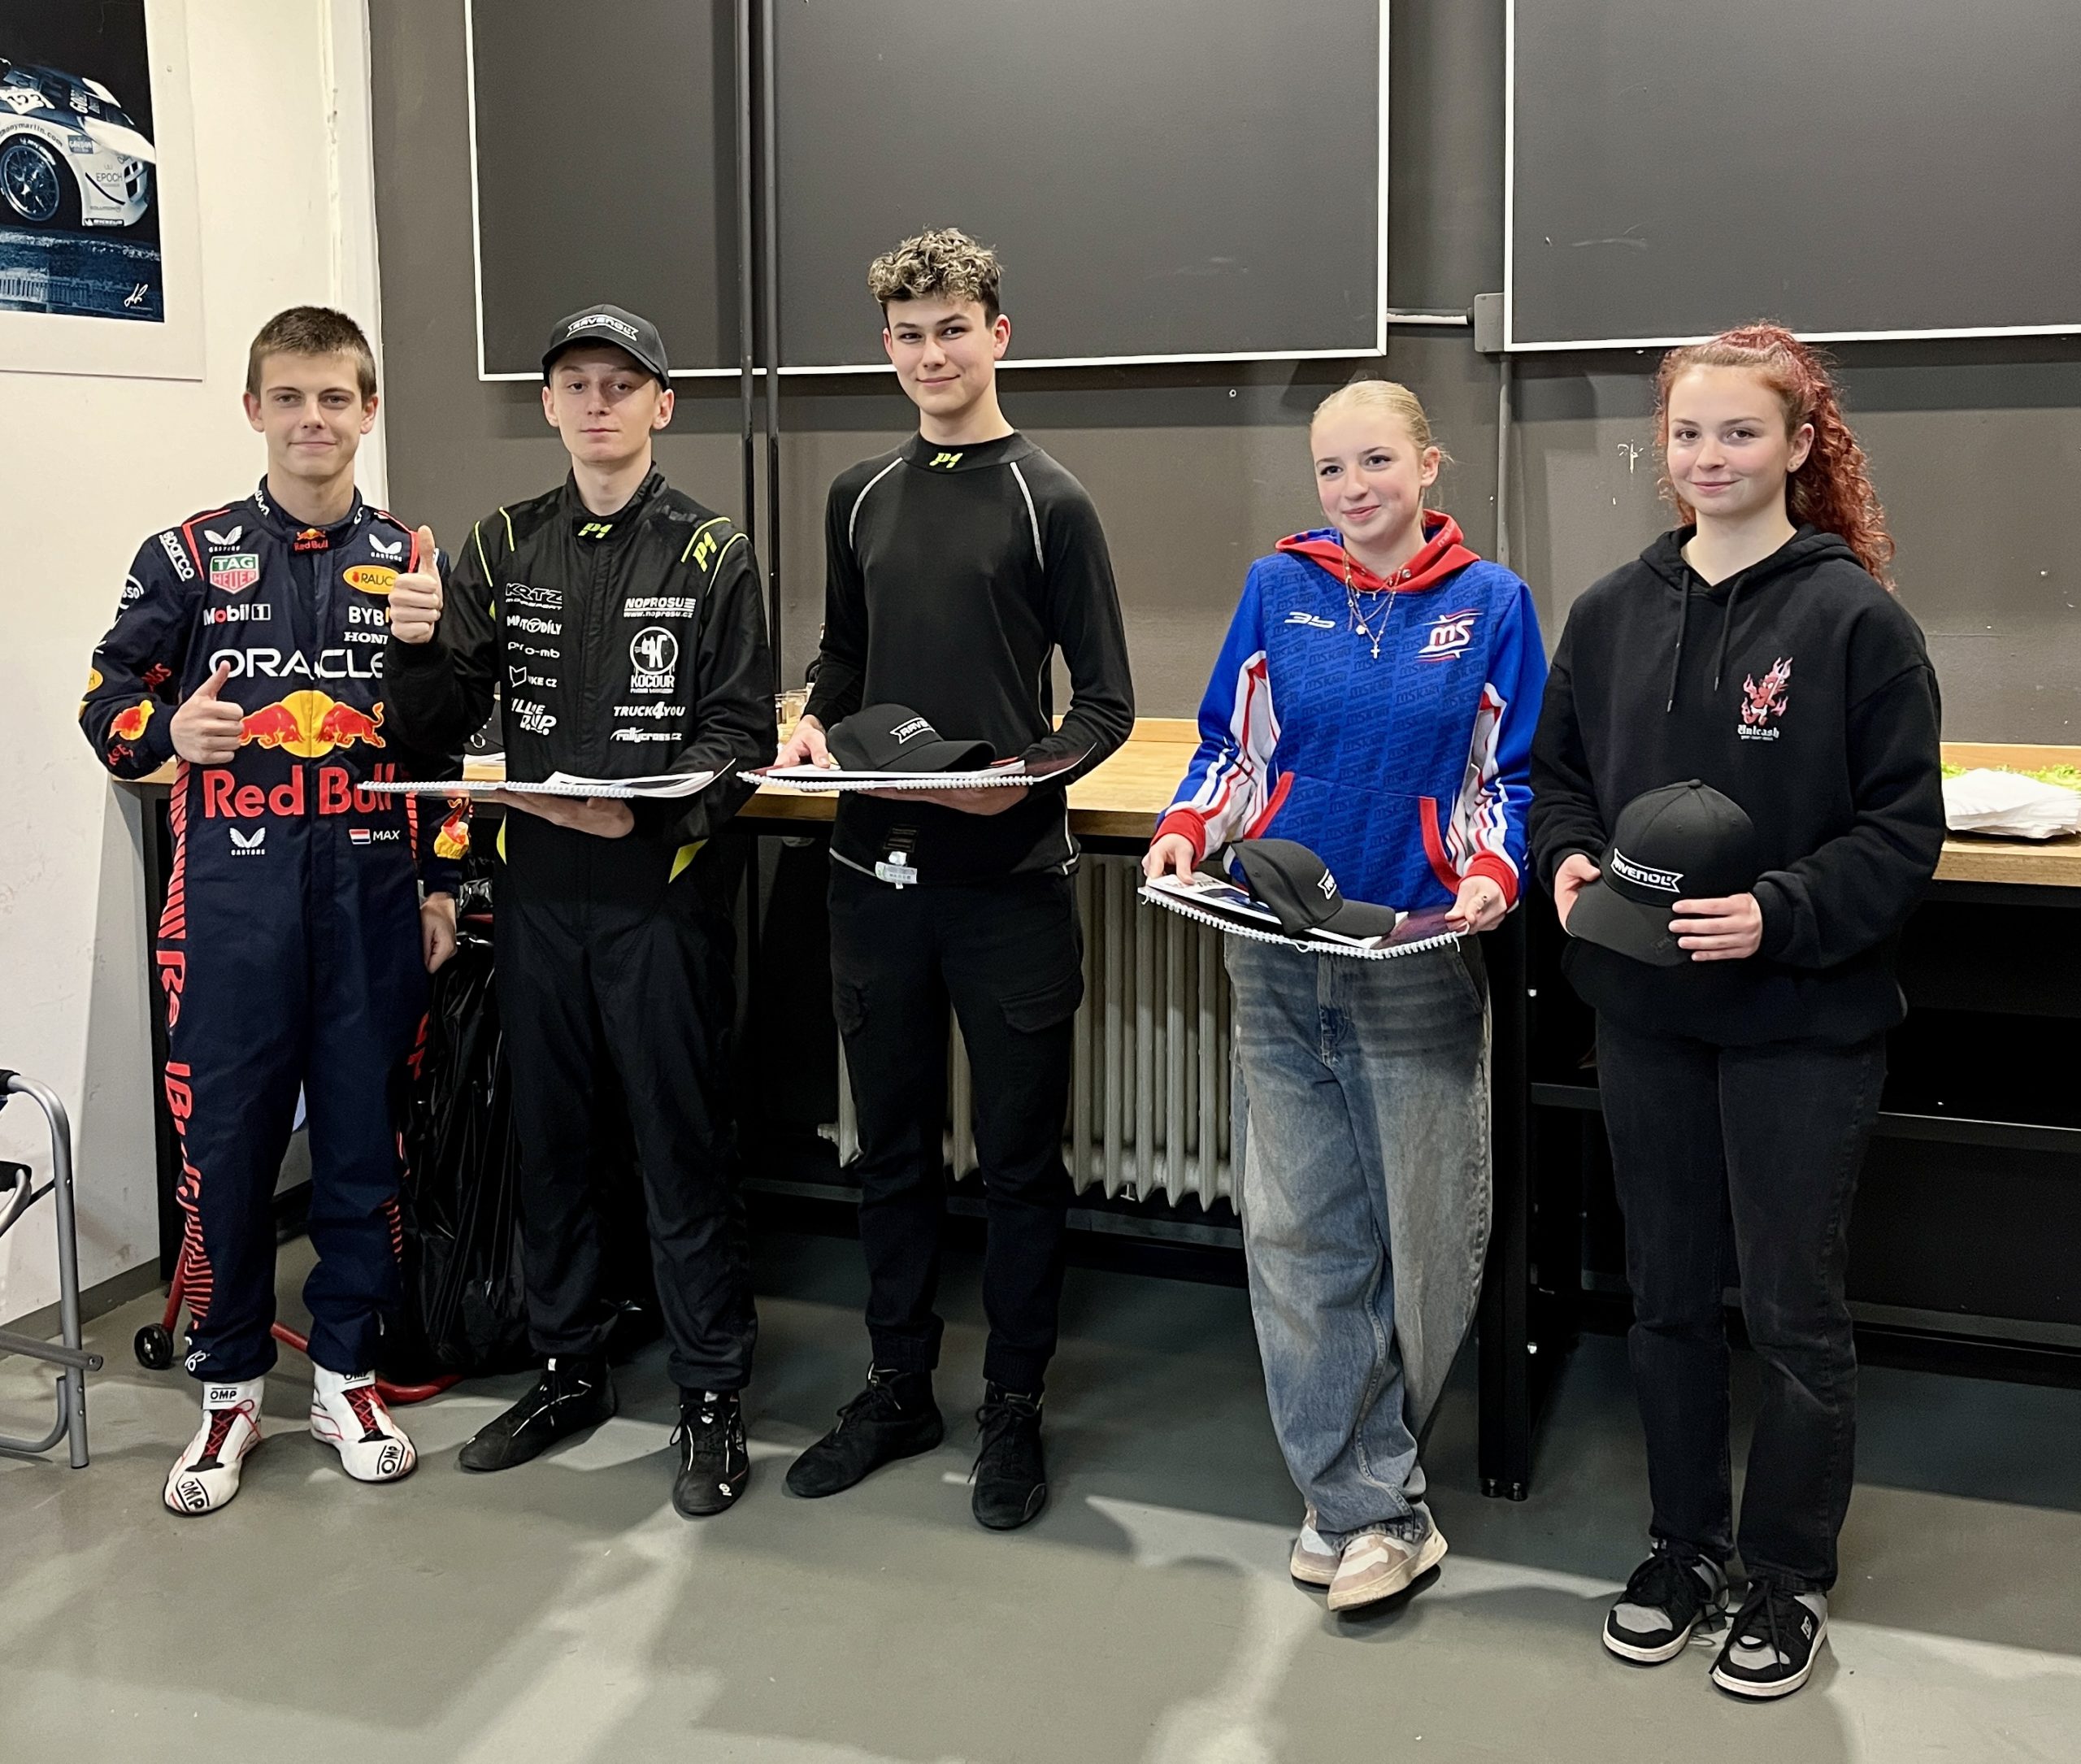 Launch of the F4 CEZ Academy at Lukamotorsport: A New Era for Young Racers